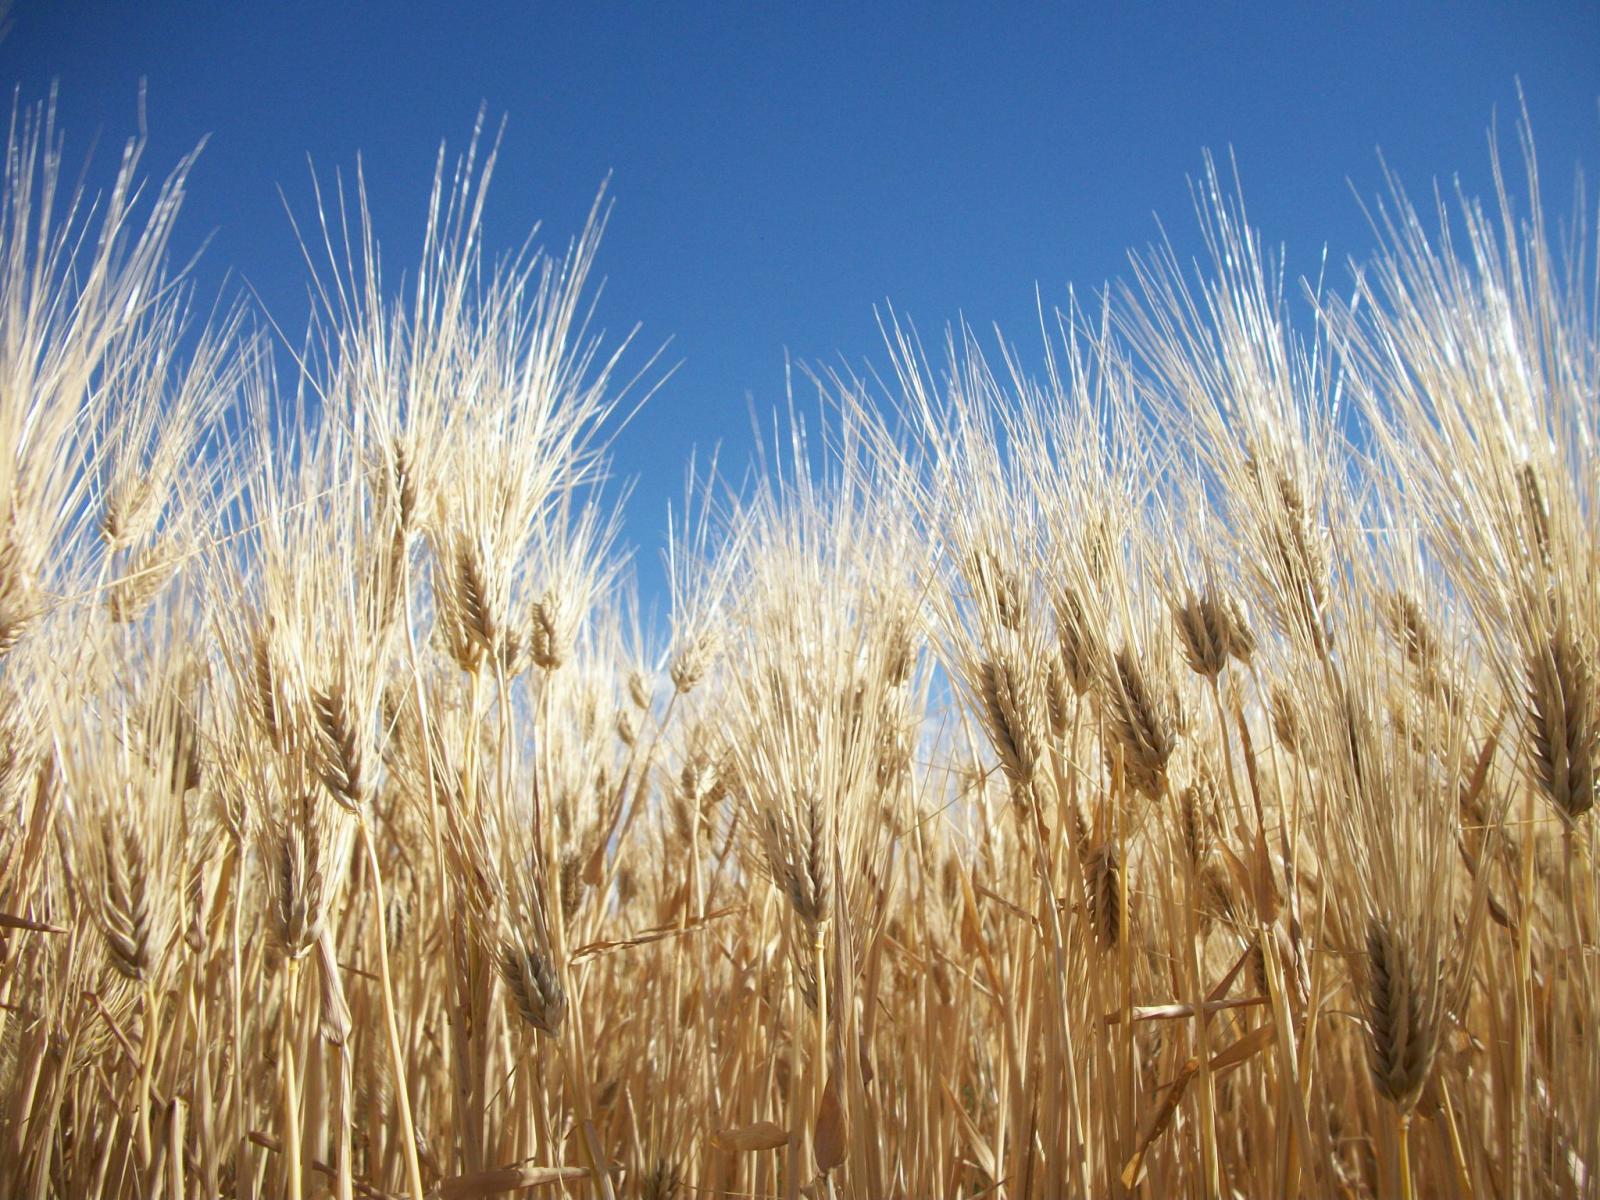 Project Aims To Develop Winter Malting Barley Cultivars Adapted